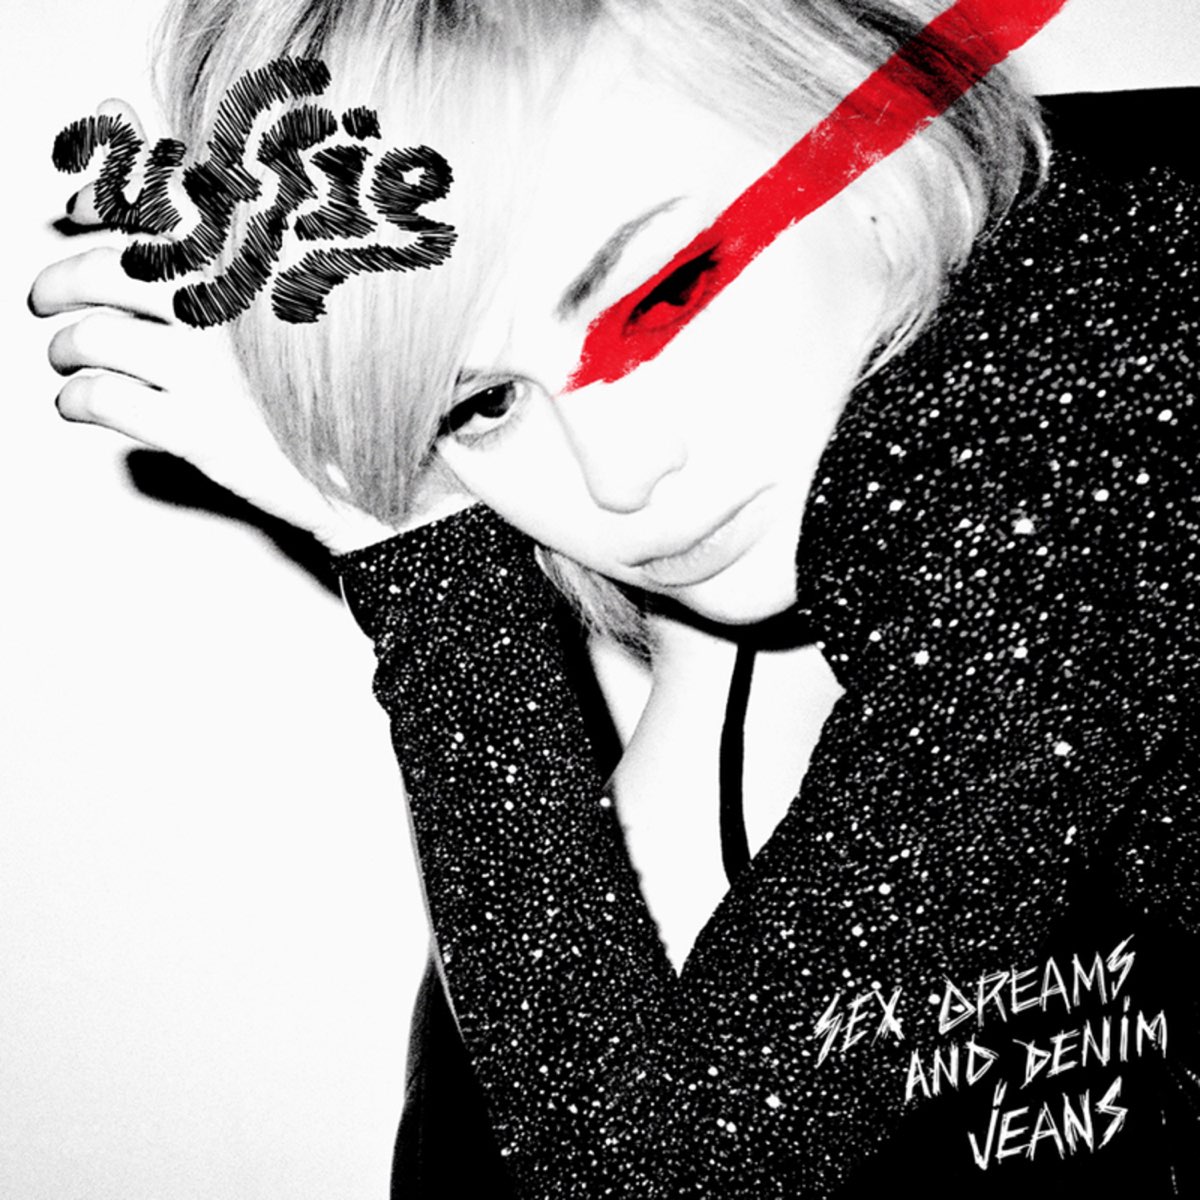 Sex Dreams and Denim Jeans by Uffie on Apple Music